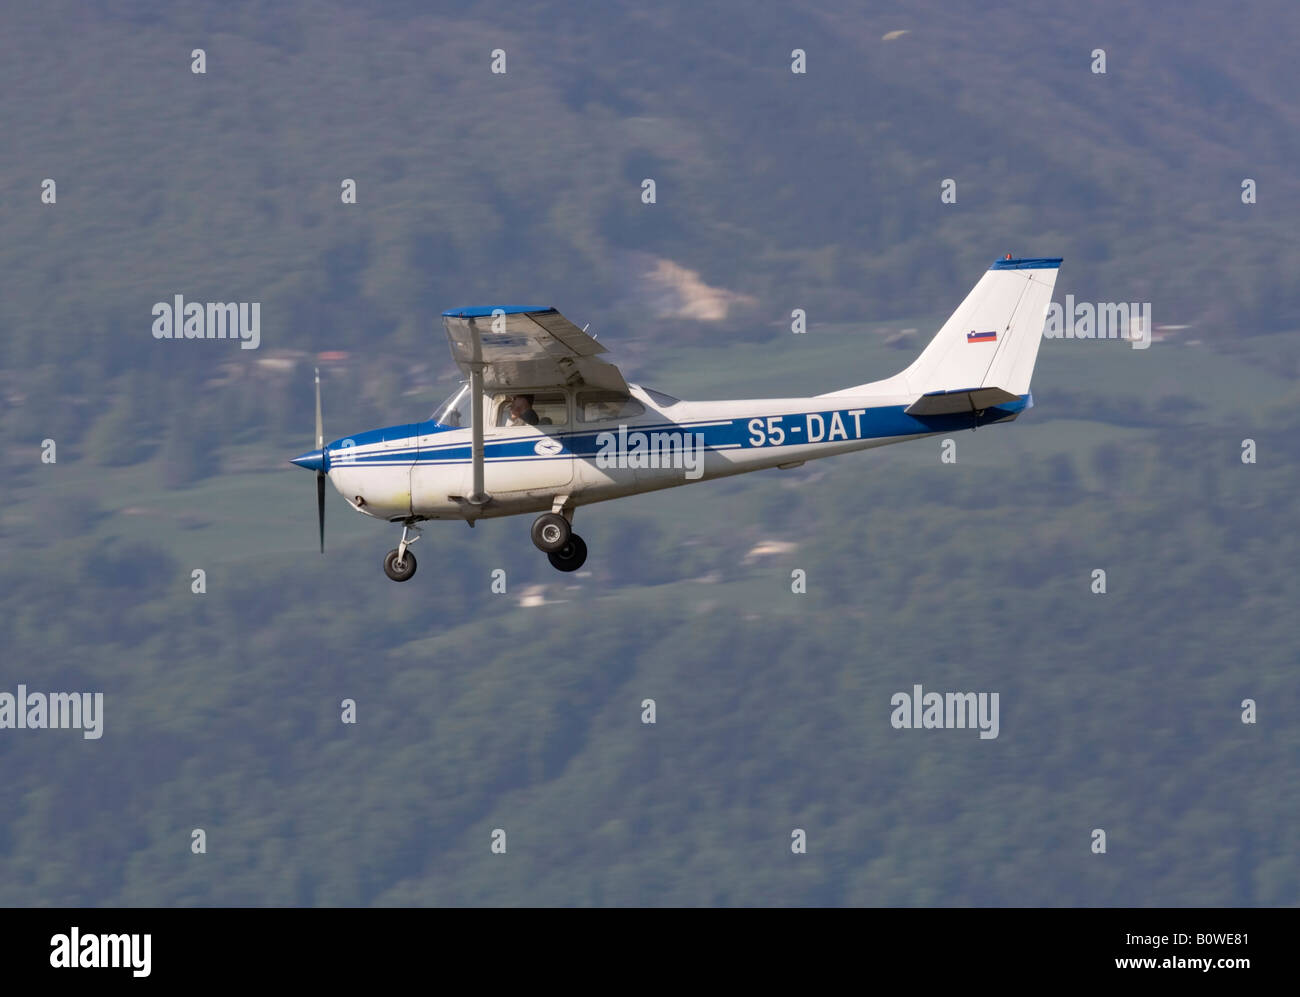 Cessna 172 Skyhawk small private aircraft flying low on approach for landing at Ljubljana Airport, Slovenia Stock Photo